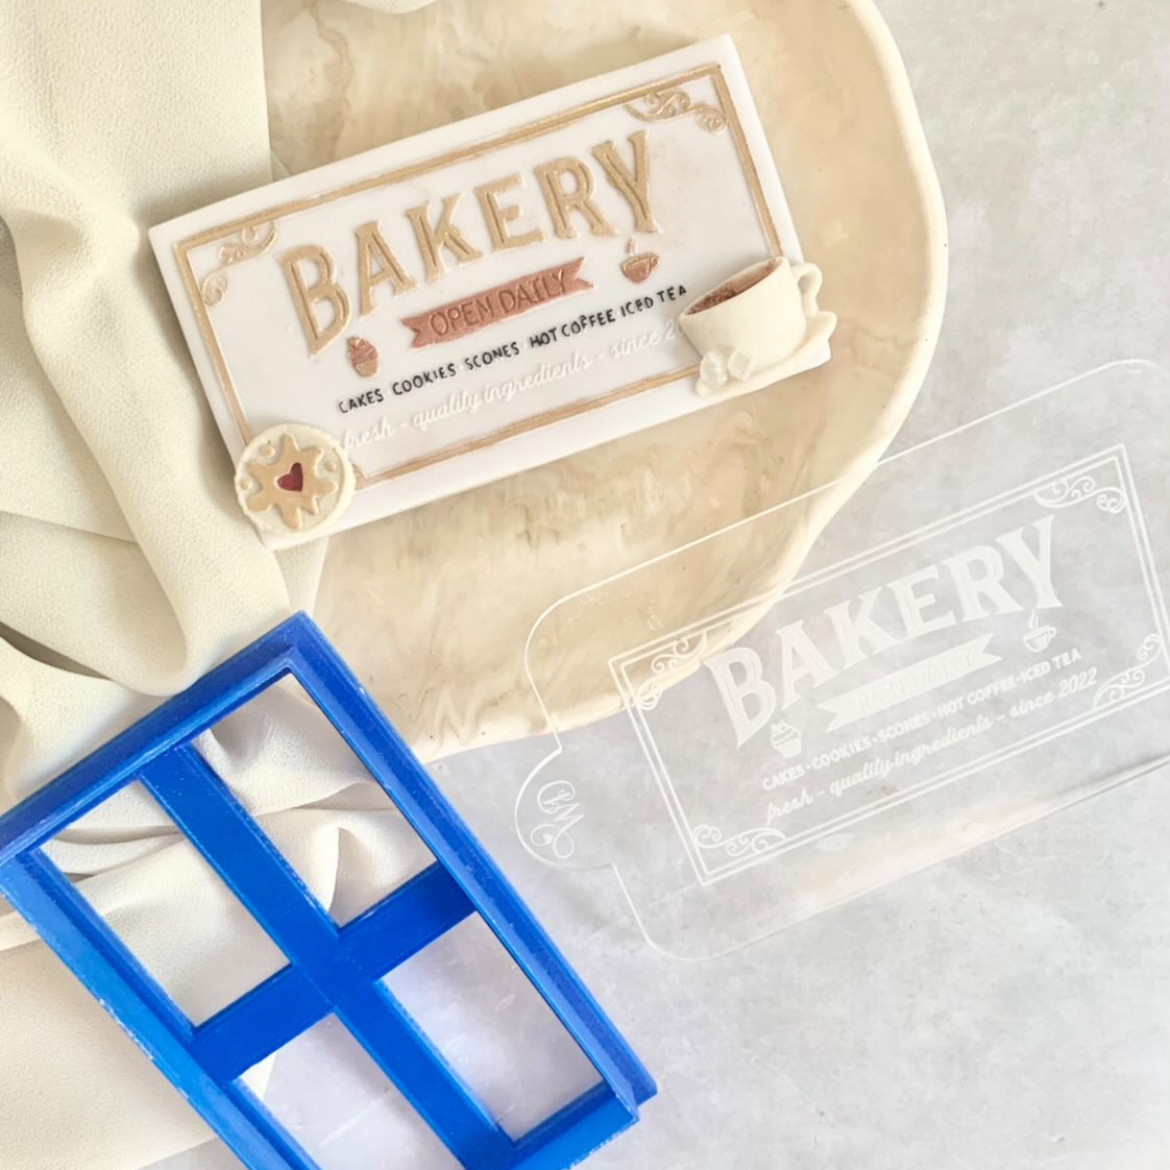 Bakery Sign Embosser and Cookie Cutter Set.